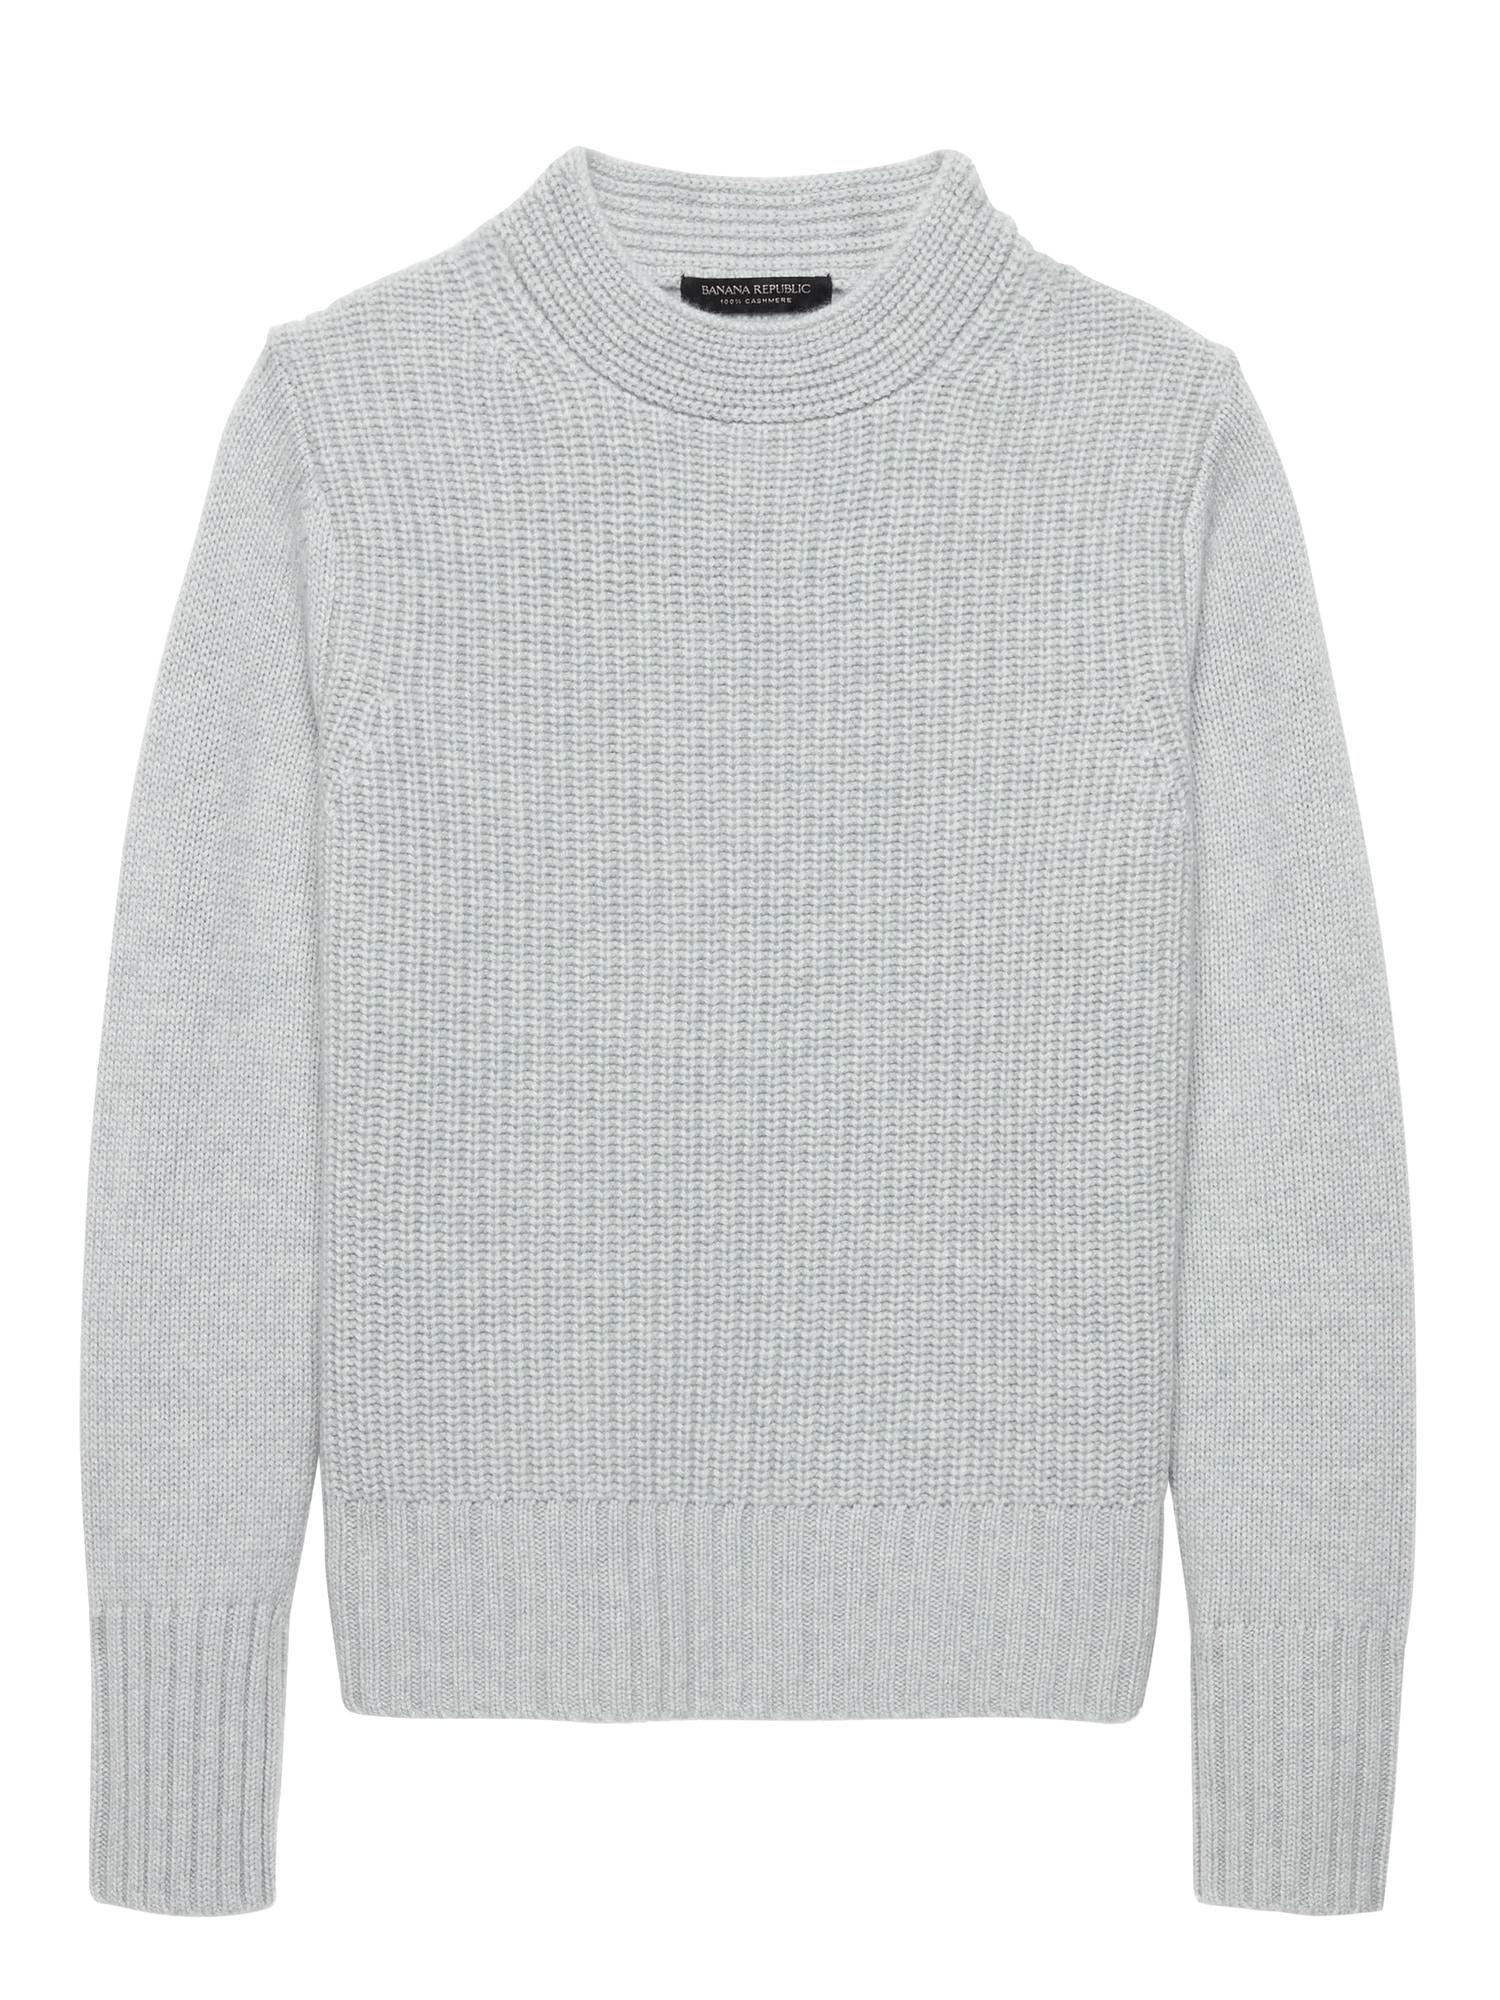 Banana Republic Cashmere Cropped Mock-neck Sweater in Light Gray (Gray ...